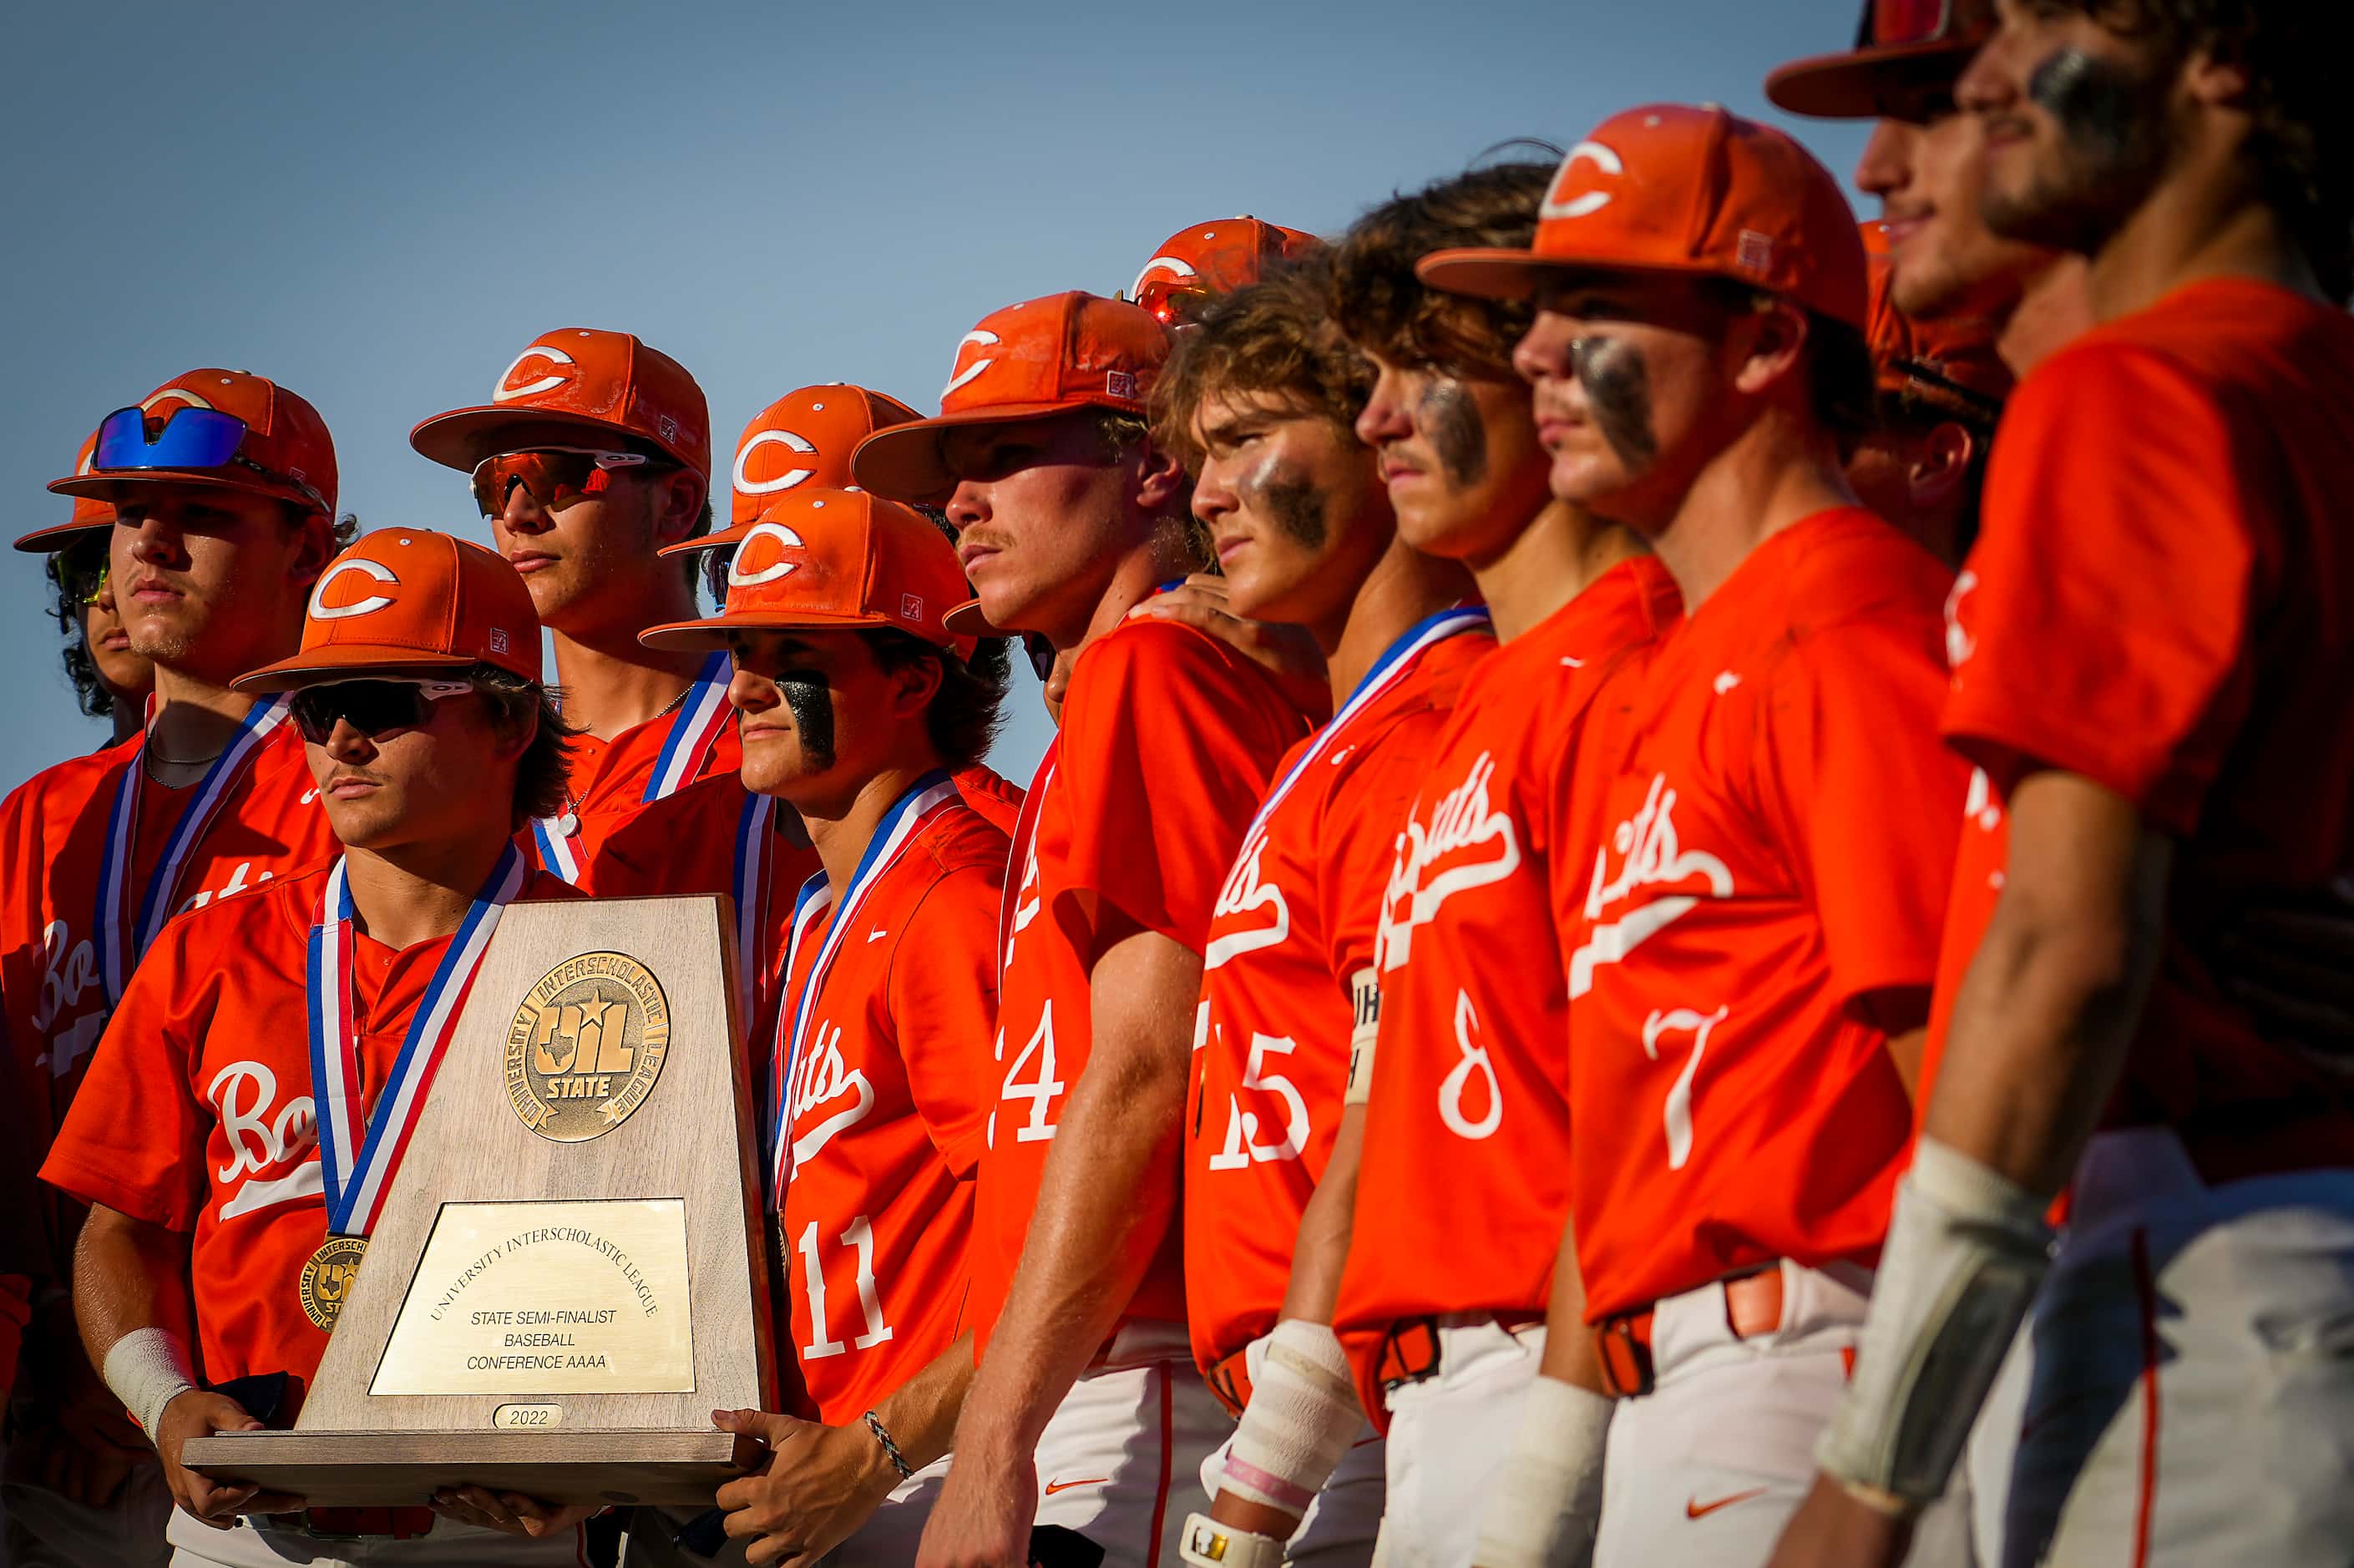 Celina players pose with the state semi-finalist trophy after a loss to Sinton in a UIL 4A...